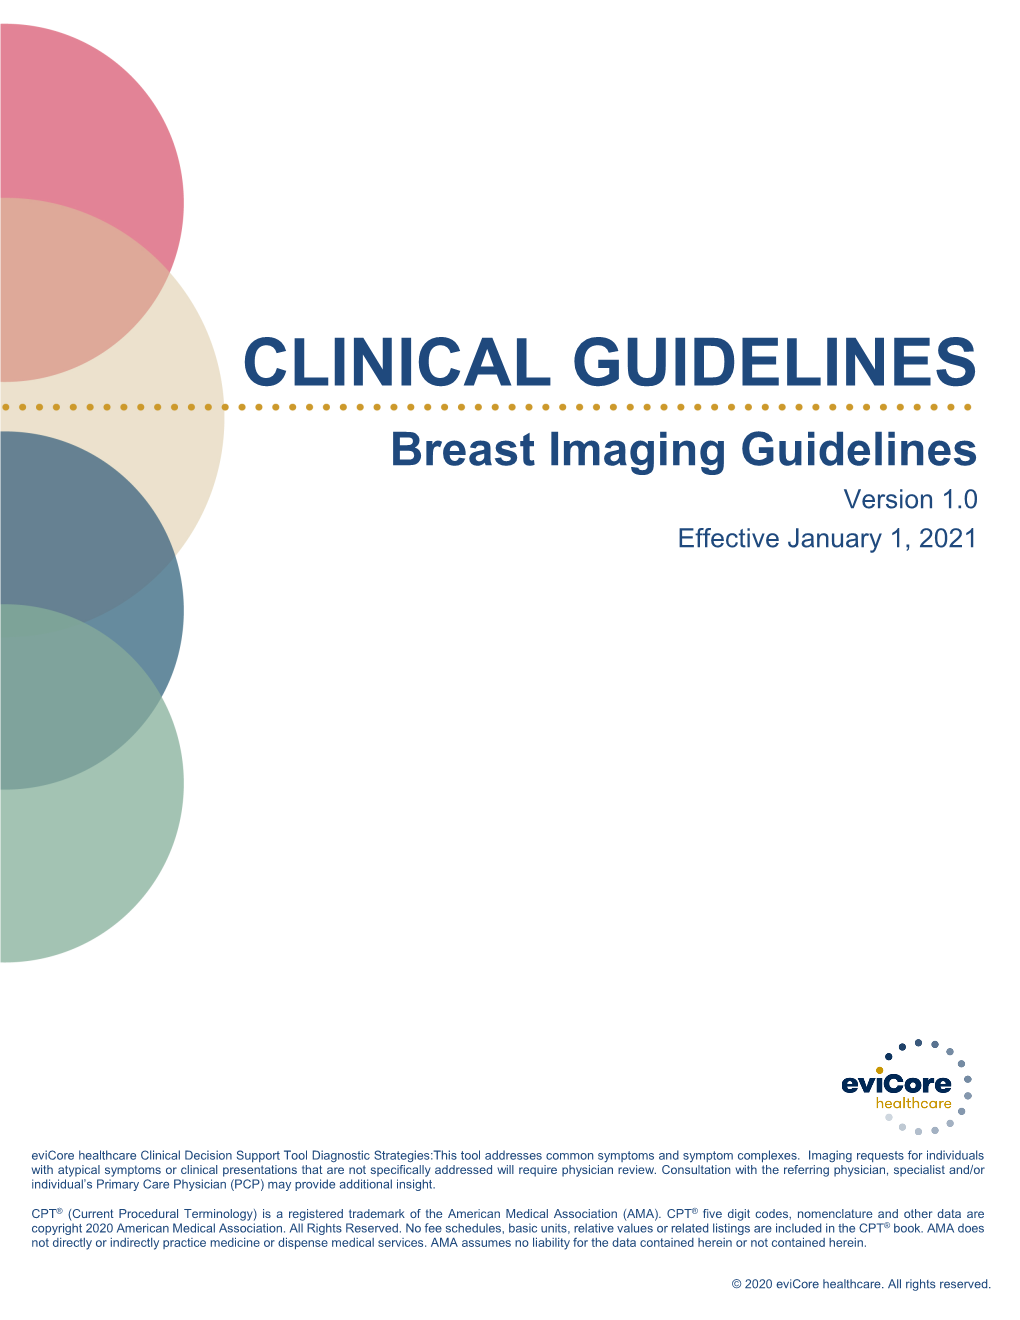 Evicore Breast Imaging Guidelines